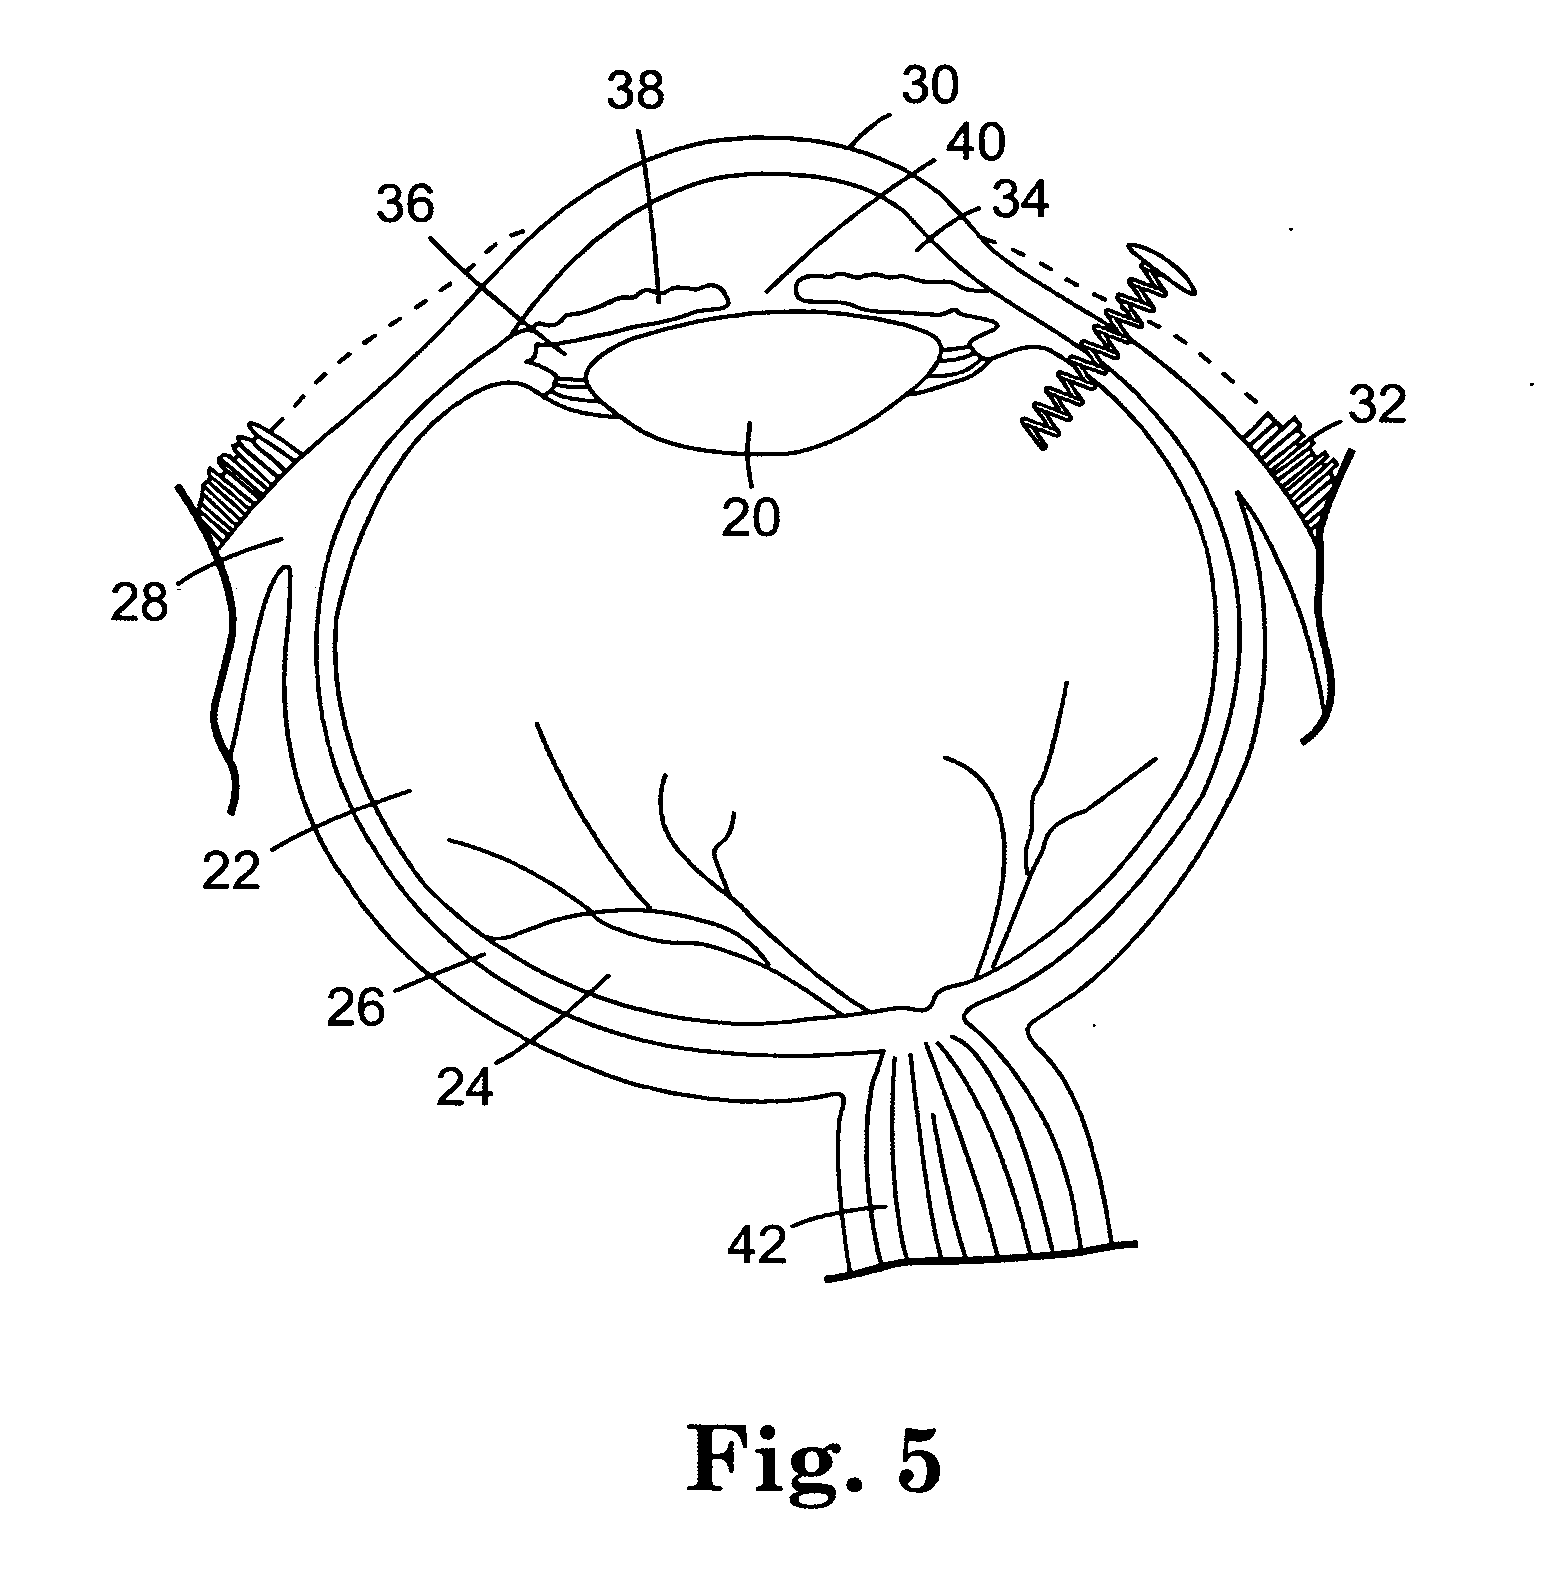 Controlled release bioactive agent delivery device